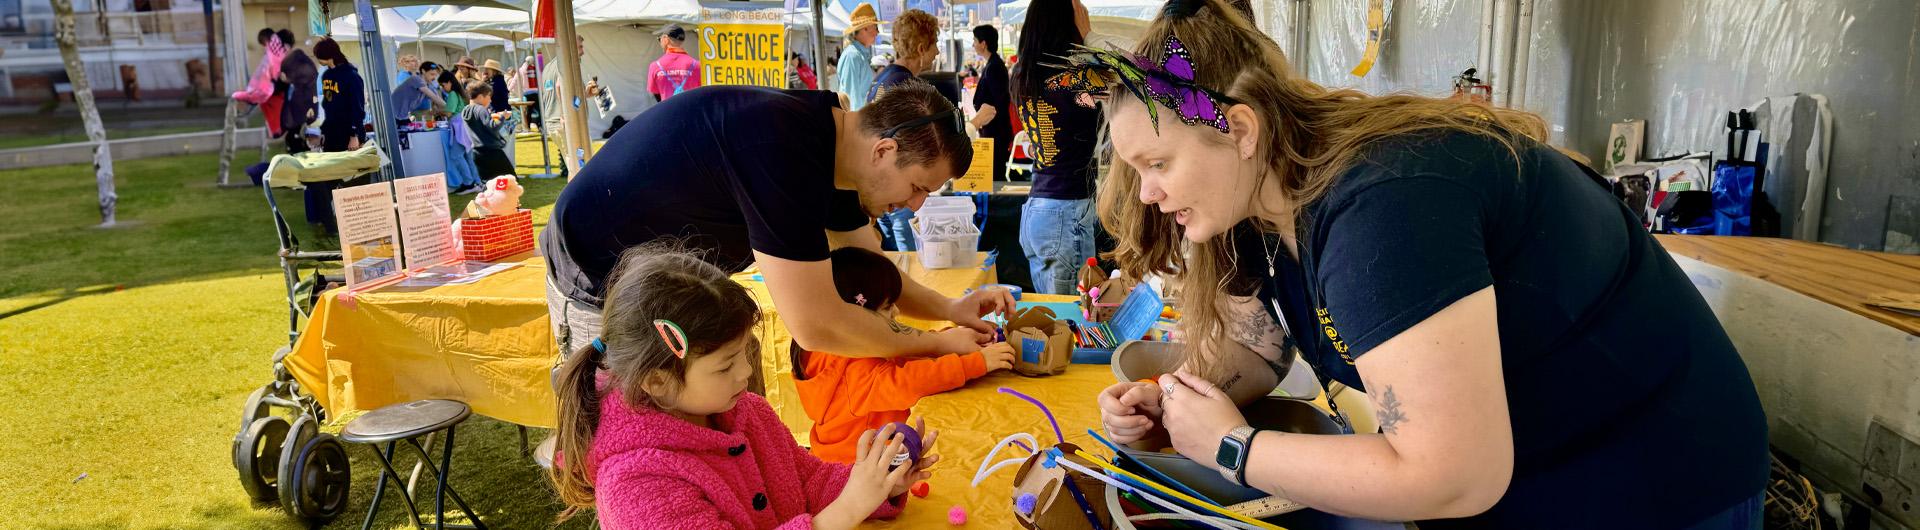 science activities at City of Stem festival